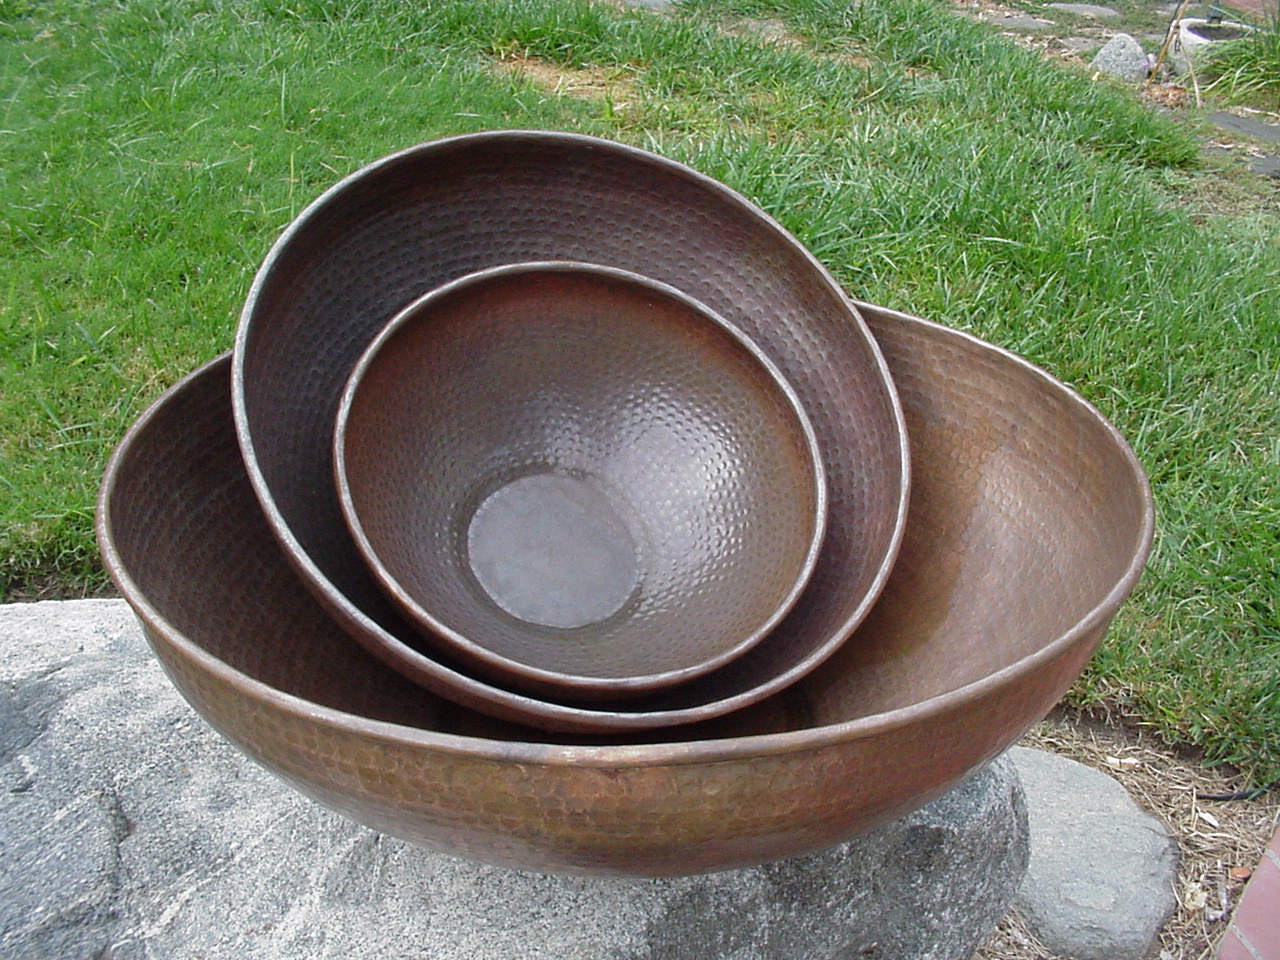 Copper Basins in Different Sized on a Concrete Slab